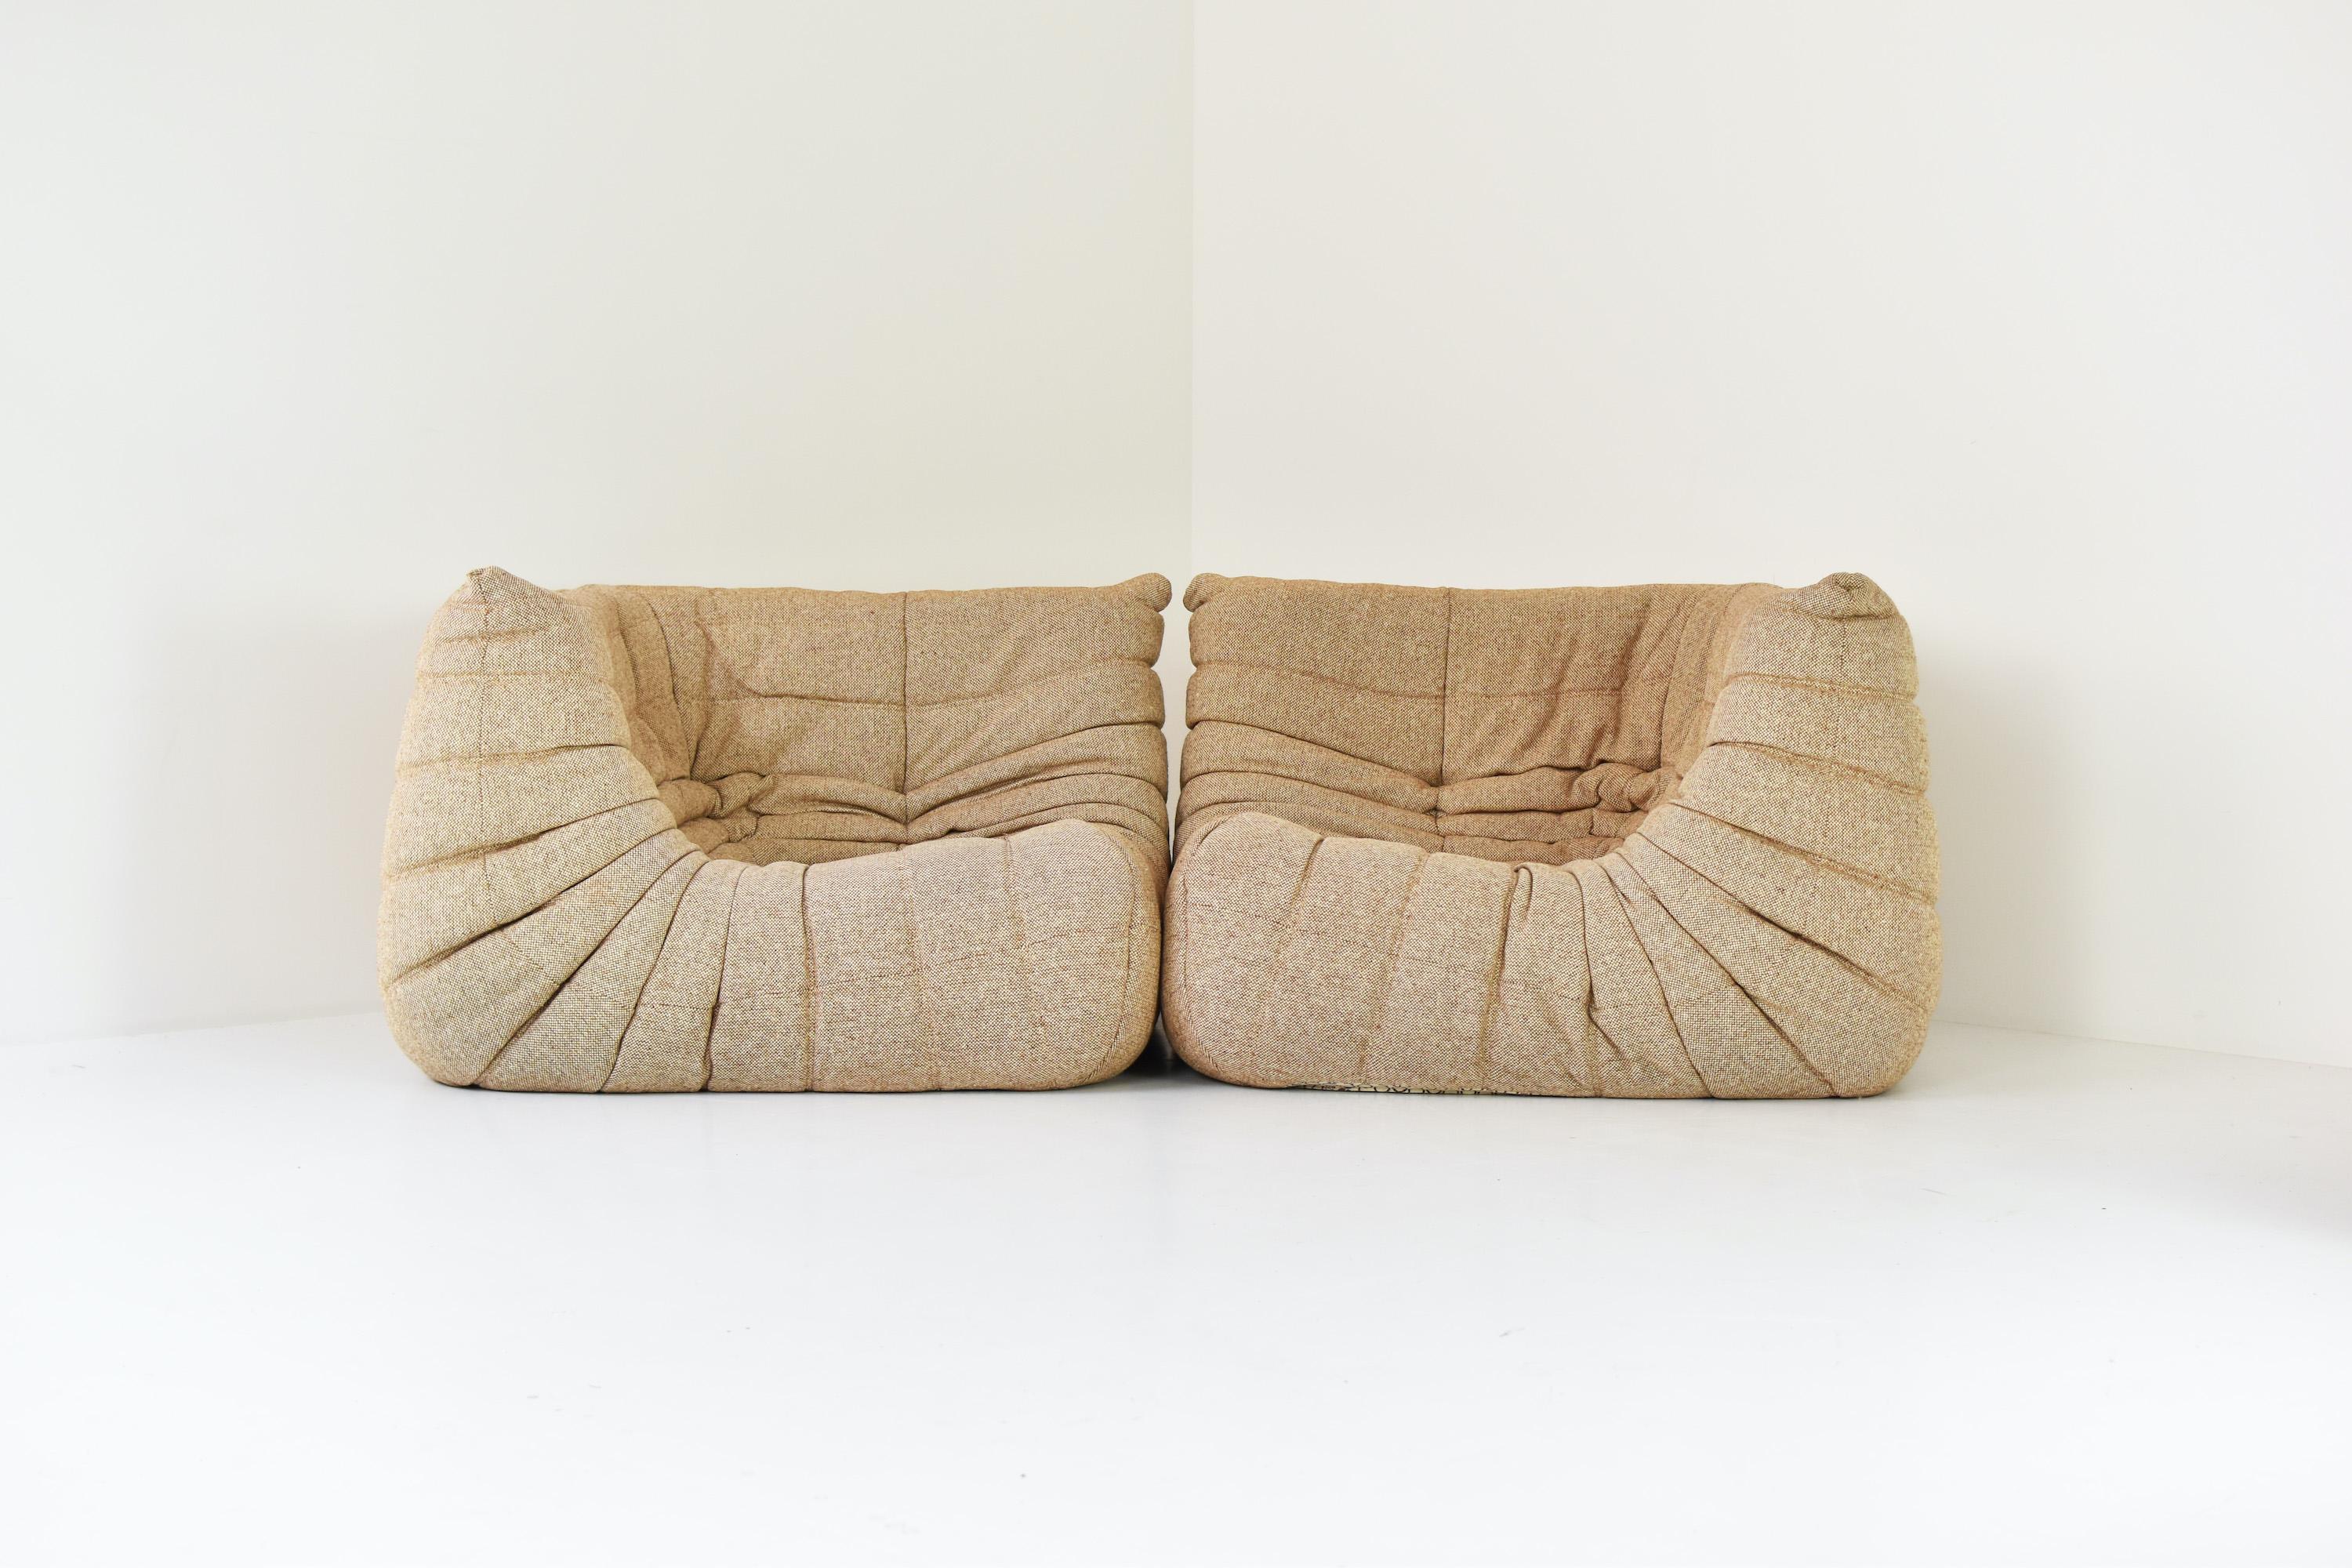 Set of two ‘Togo’ corner seaters designed by Michel Ducaroy for Ligne Roset, France 1960’s. This iconic sofa is completely made out of foam and features the original wool fabric upholstery. Labeled on the side. Extremely good original condition.